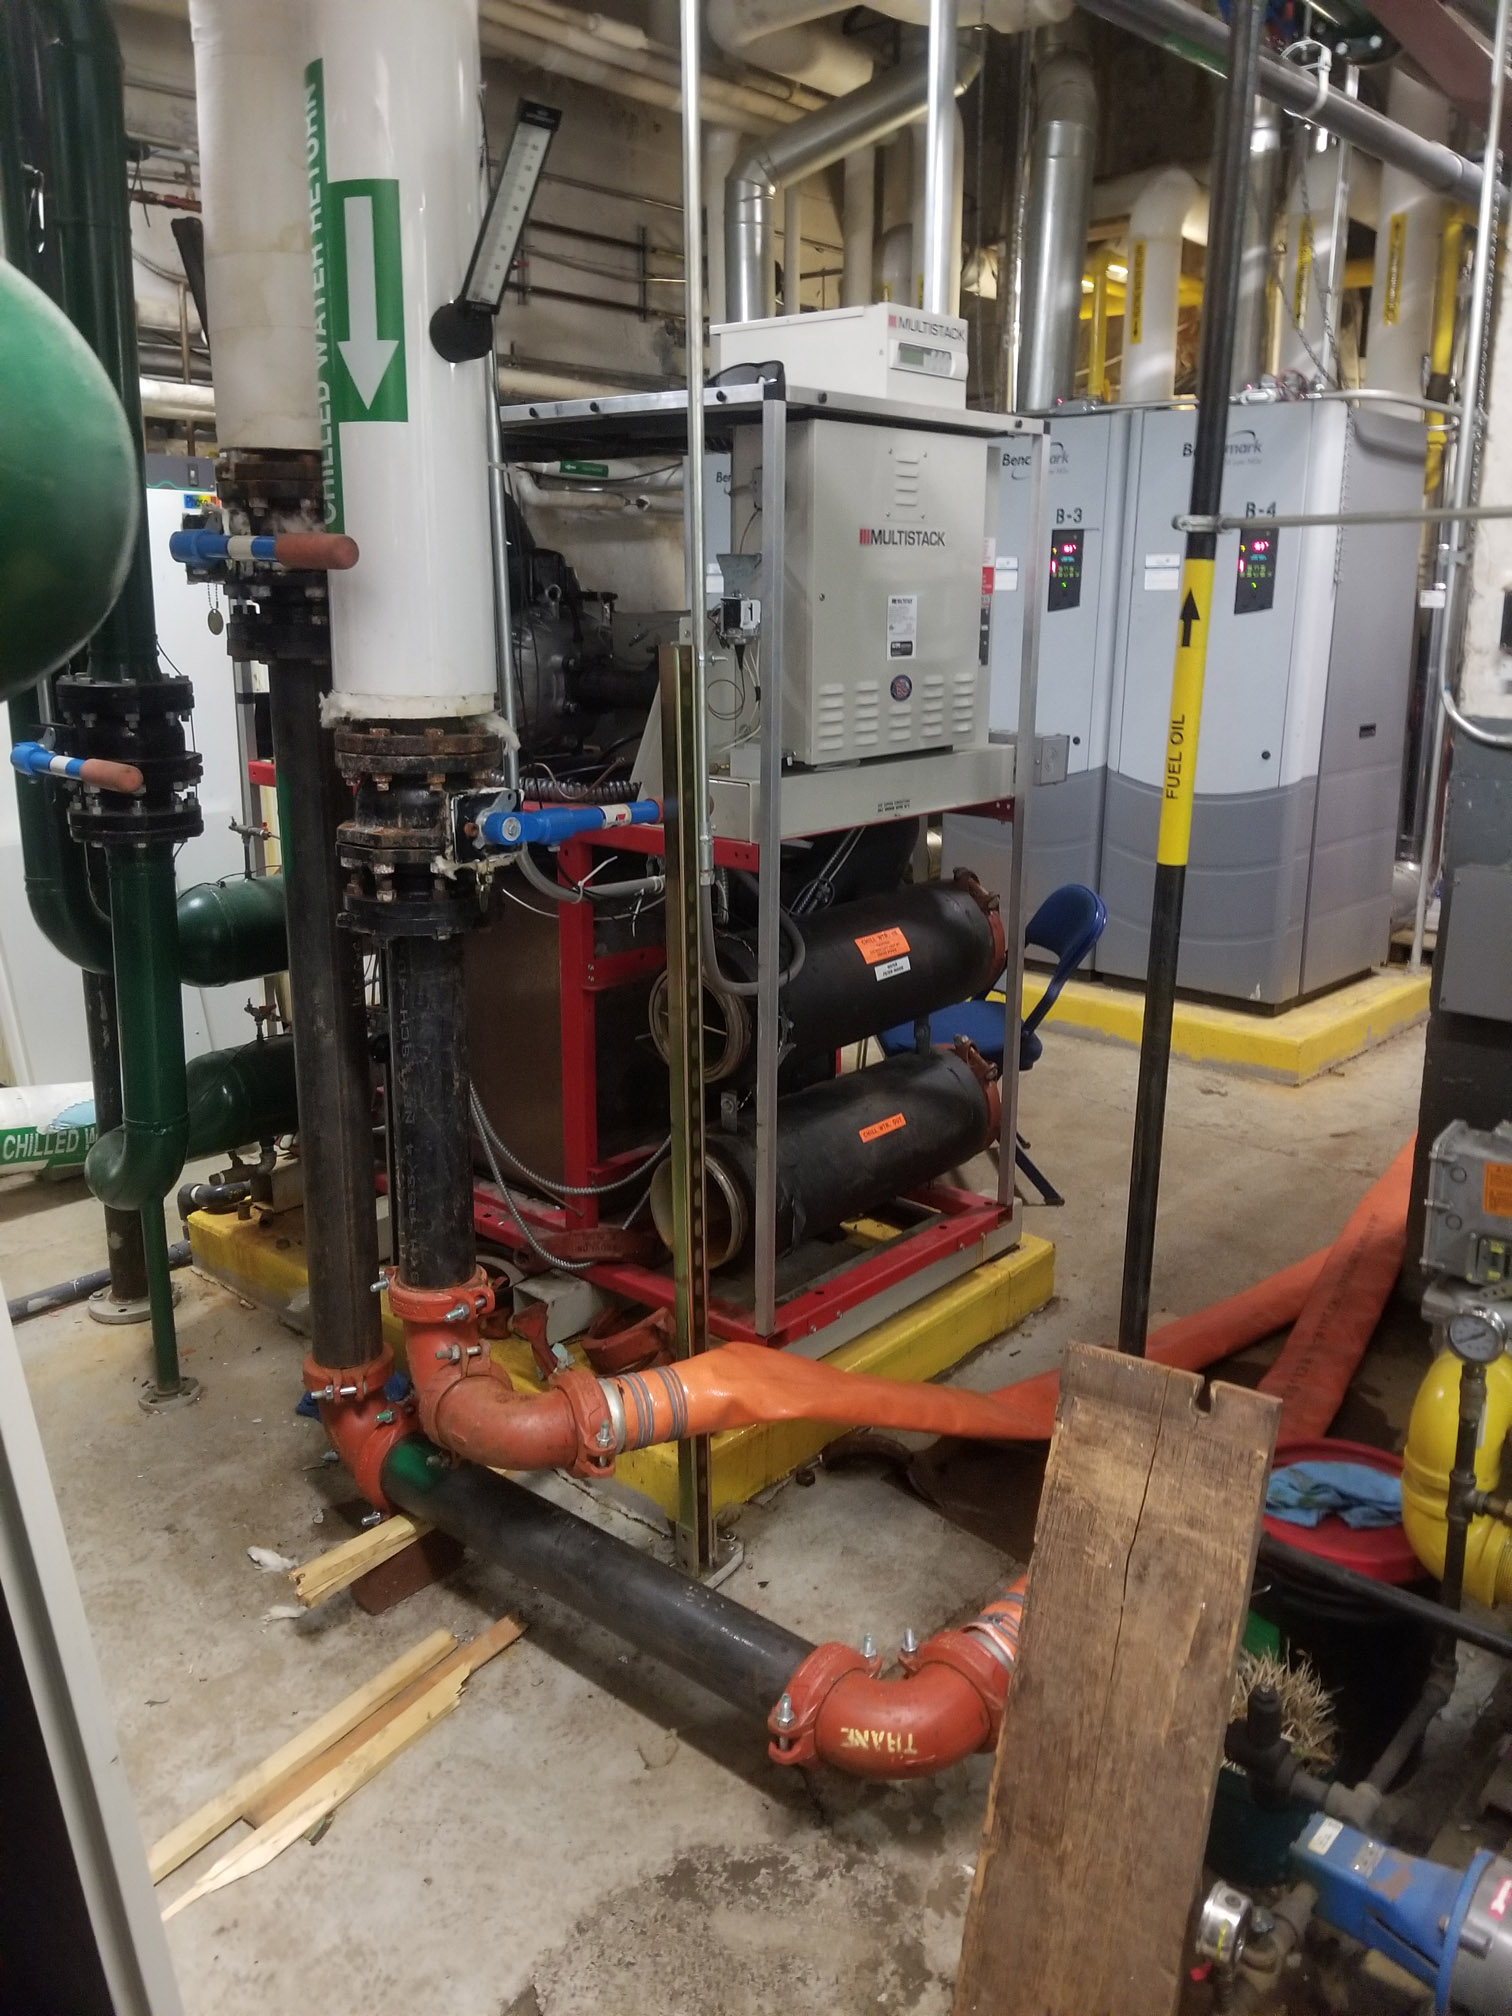 Air Cooled Chiller Rental Madison County FL, Chiller AC Rental Madison County FL, Temporary Chiller Madison County FL, Rental Chiller Installation Madison County FL